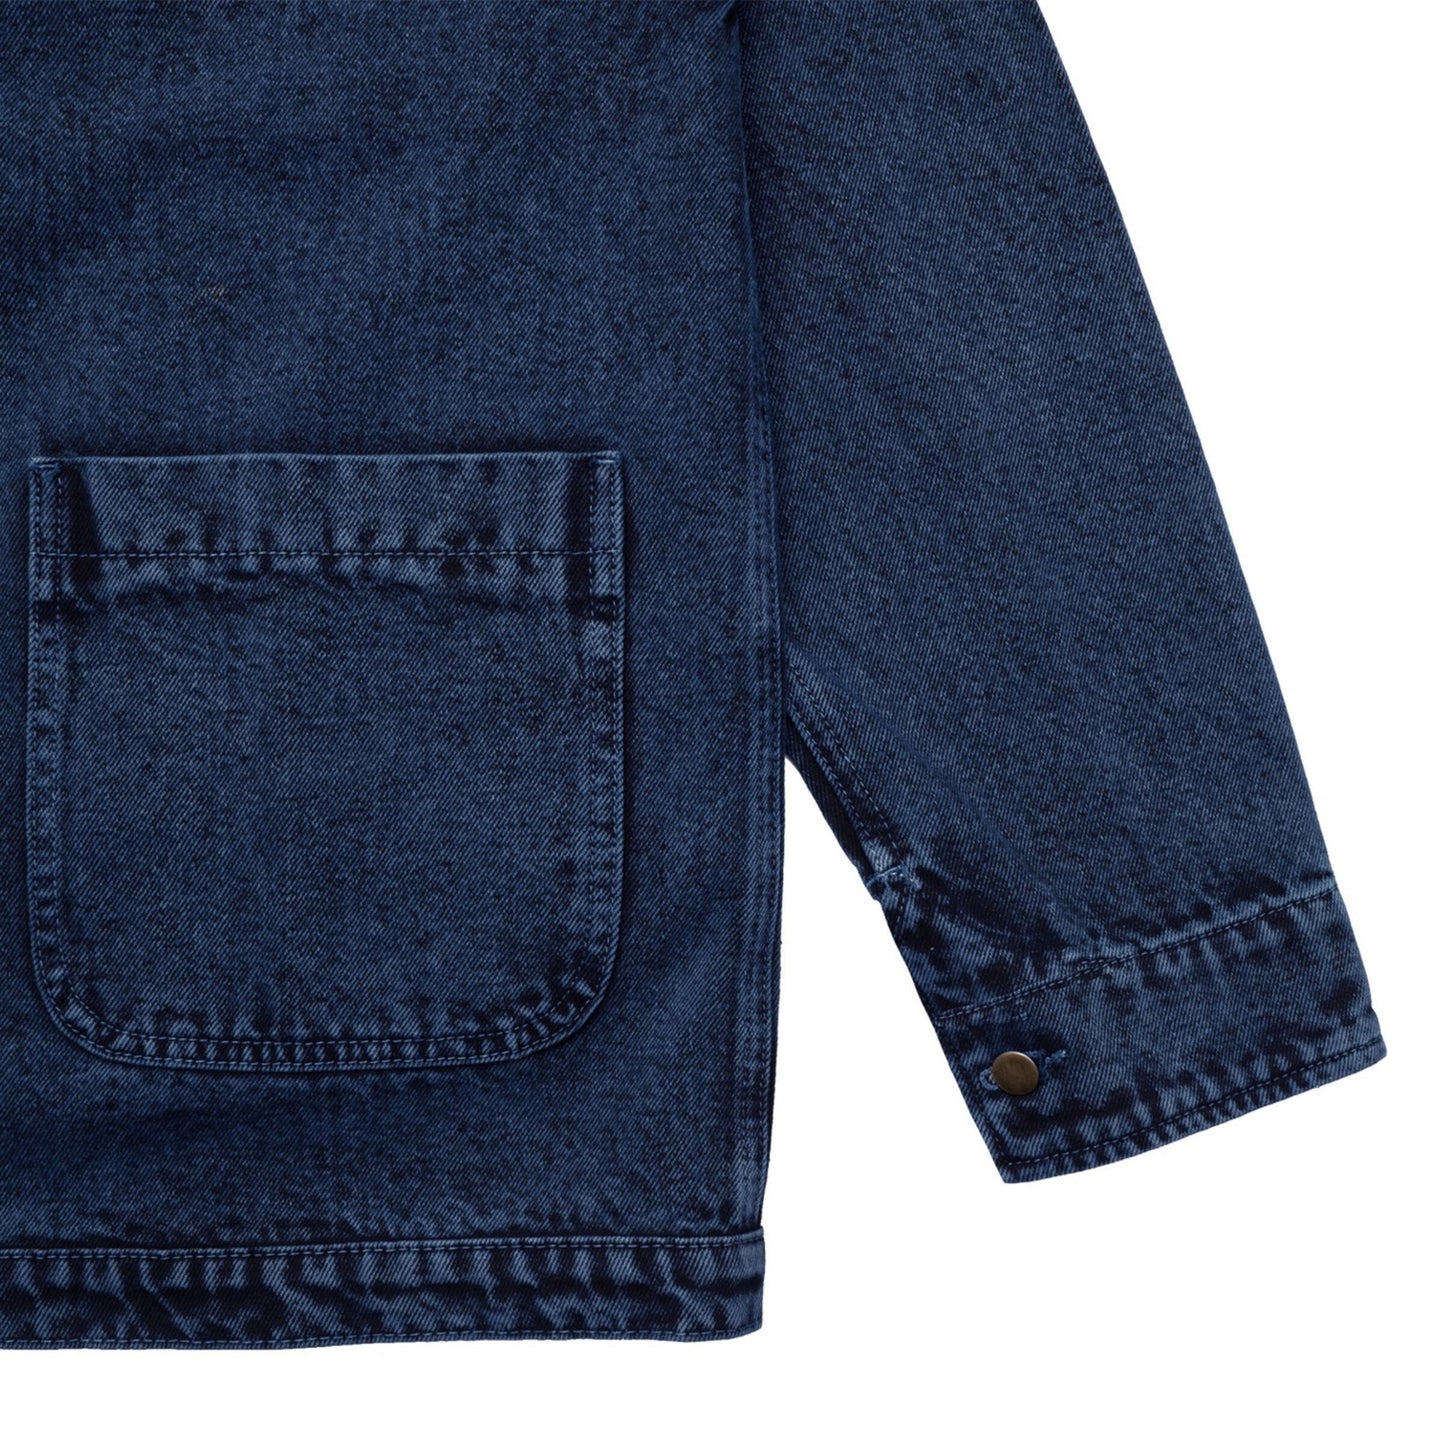 Pass-Port Workers Club Painters Jacket Over-Dye Navy